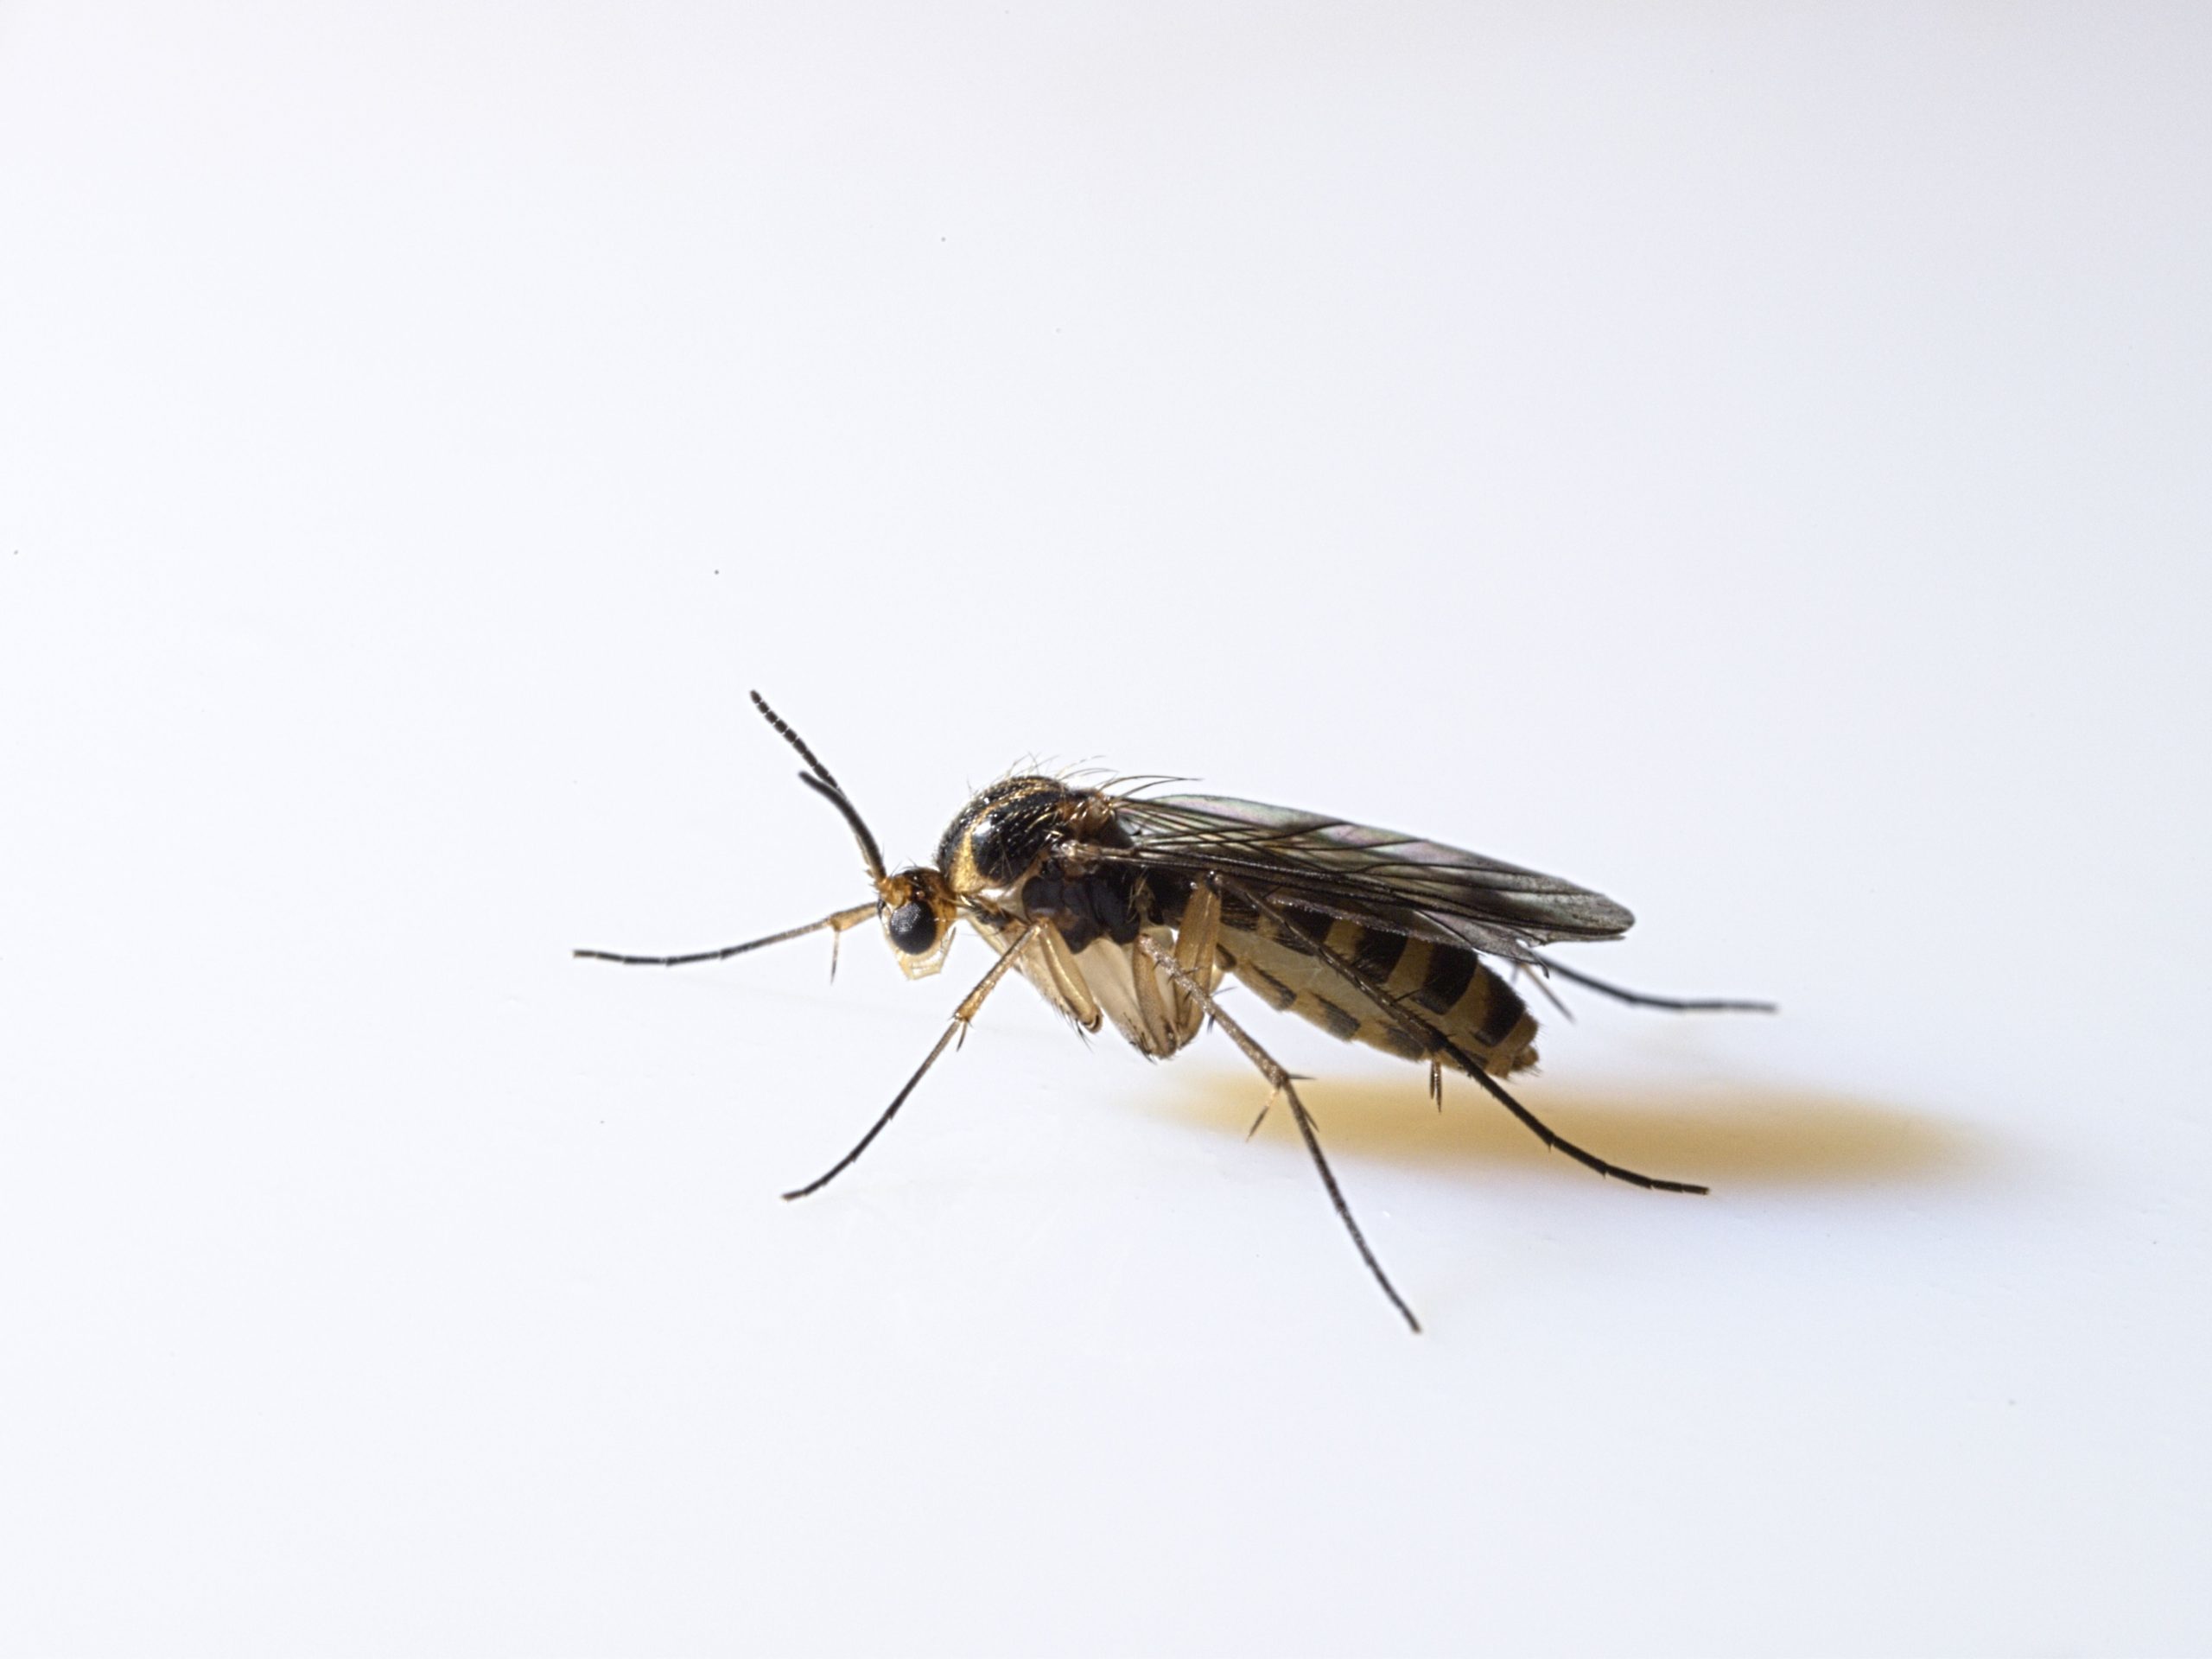 Fungus gnats - How to identify and get rid of (2022)